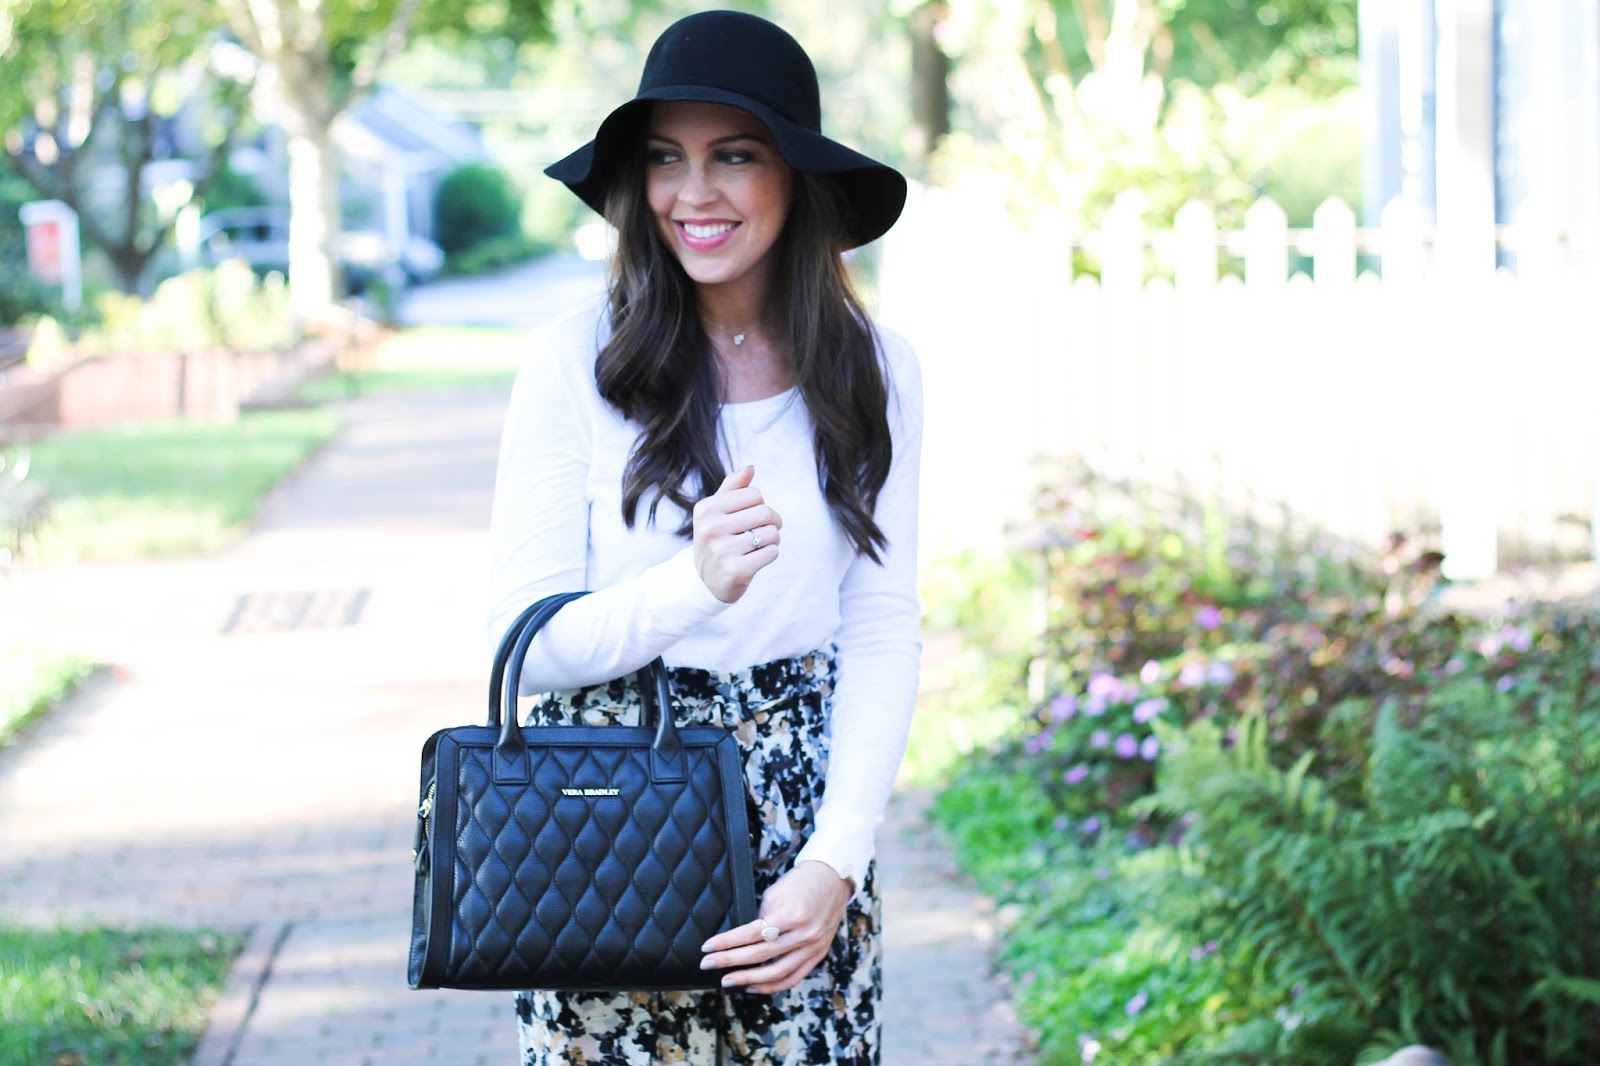 Nordstrom Leith Pleated Highwaisted Print Flare Pants, LOFT white long sleeve tee, black felt floppy hat,  quilted Vera Bradley satchel, fall outfit, cute fall look, ways to simplify your life, printed pants, Fearrington Village